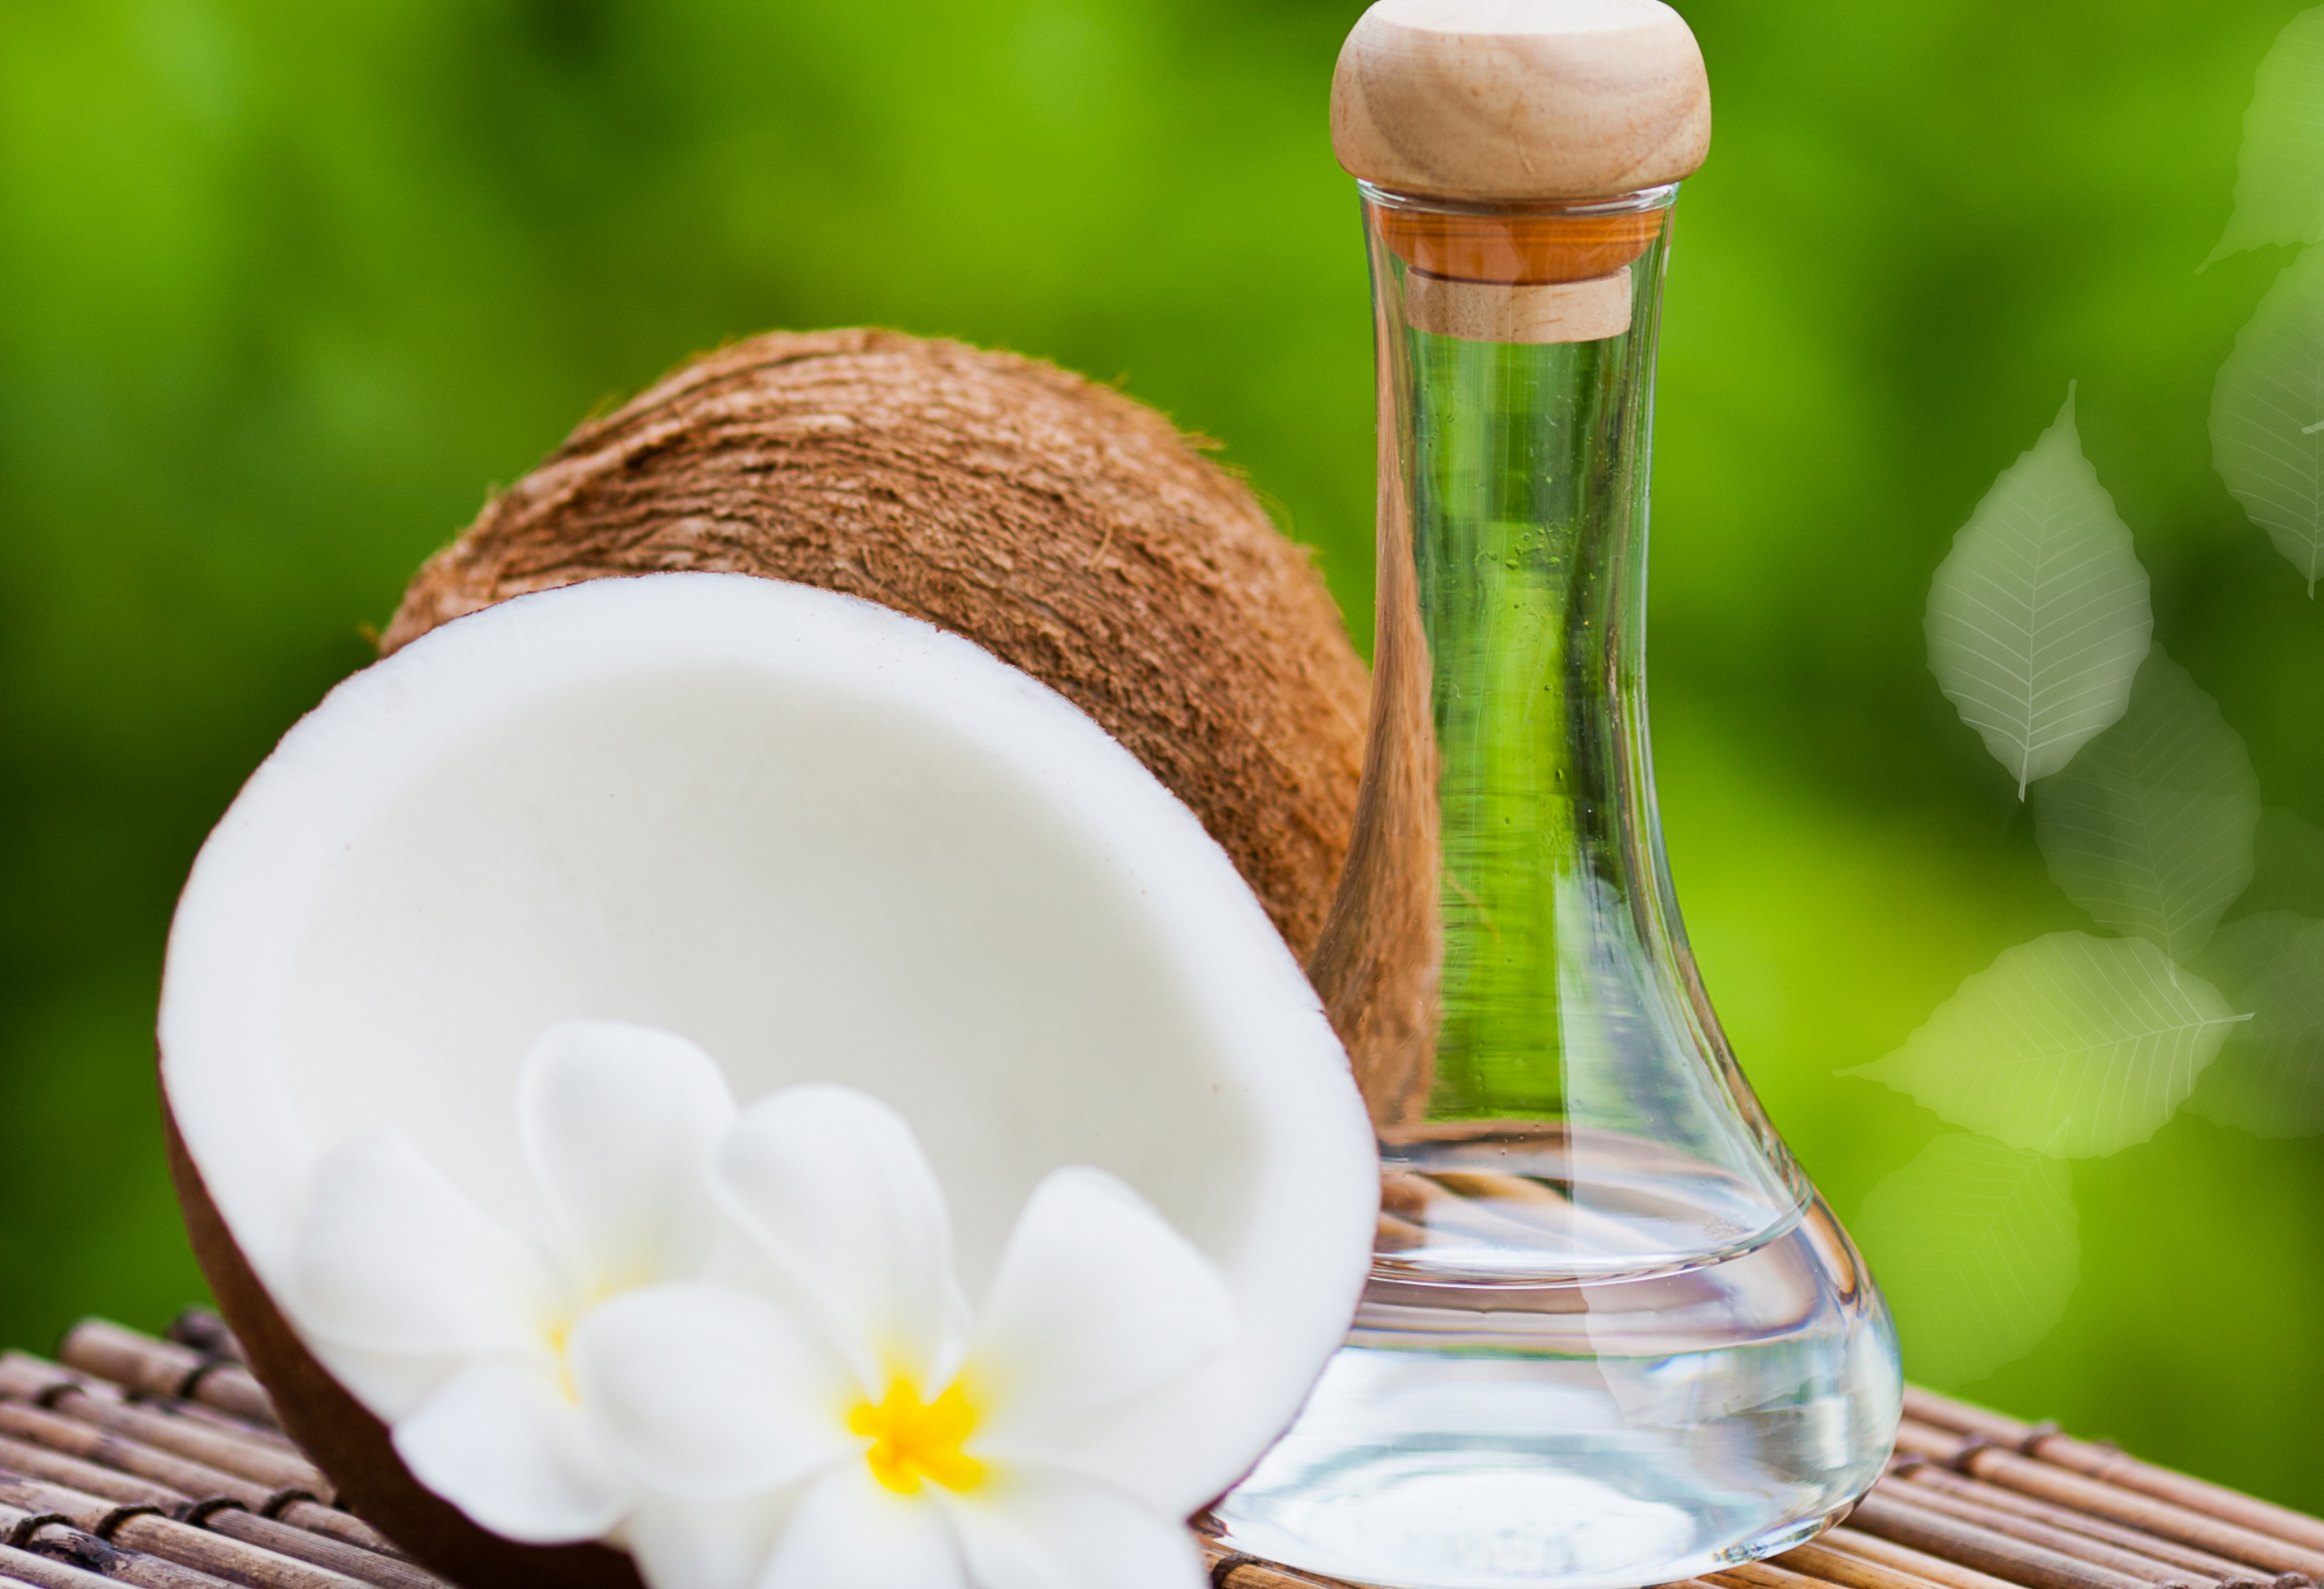 10 common Coconut Oil mistakes people make and some easy ways to fix them